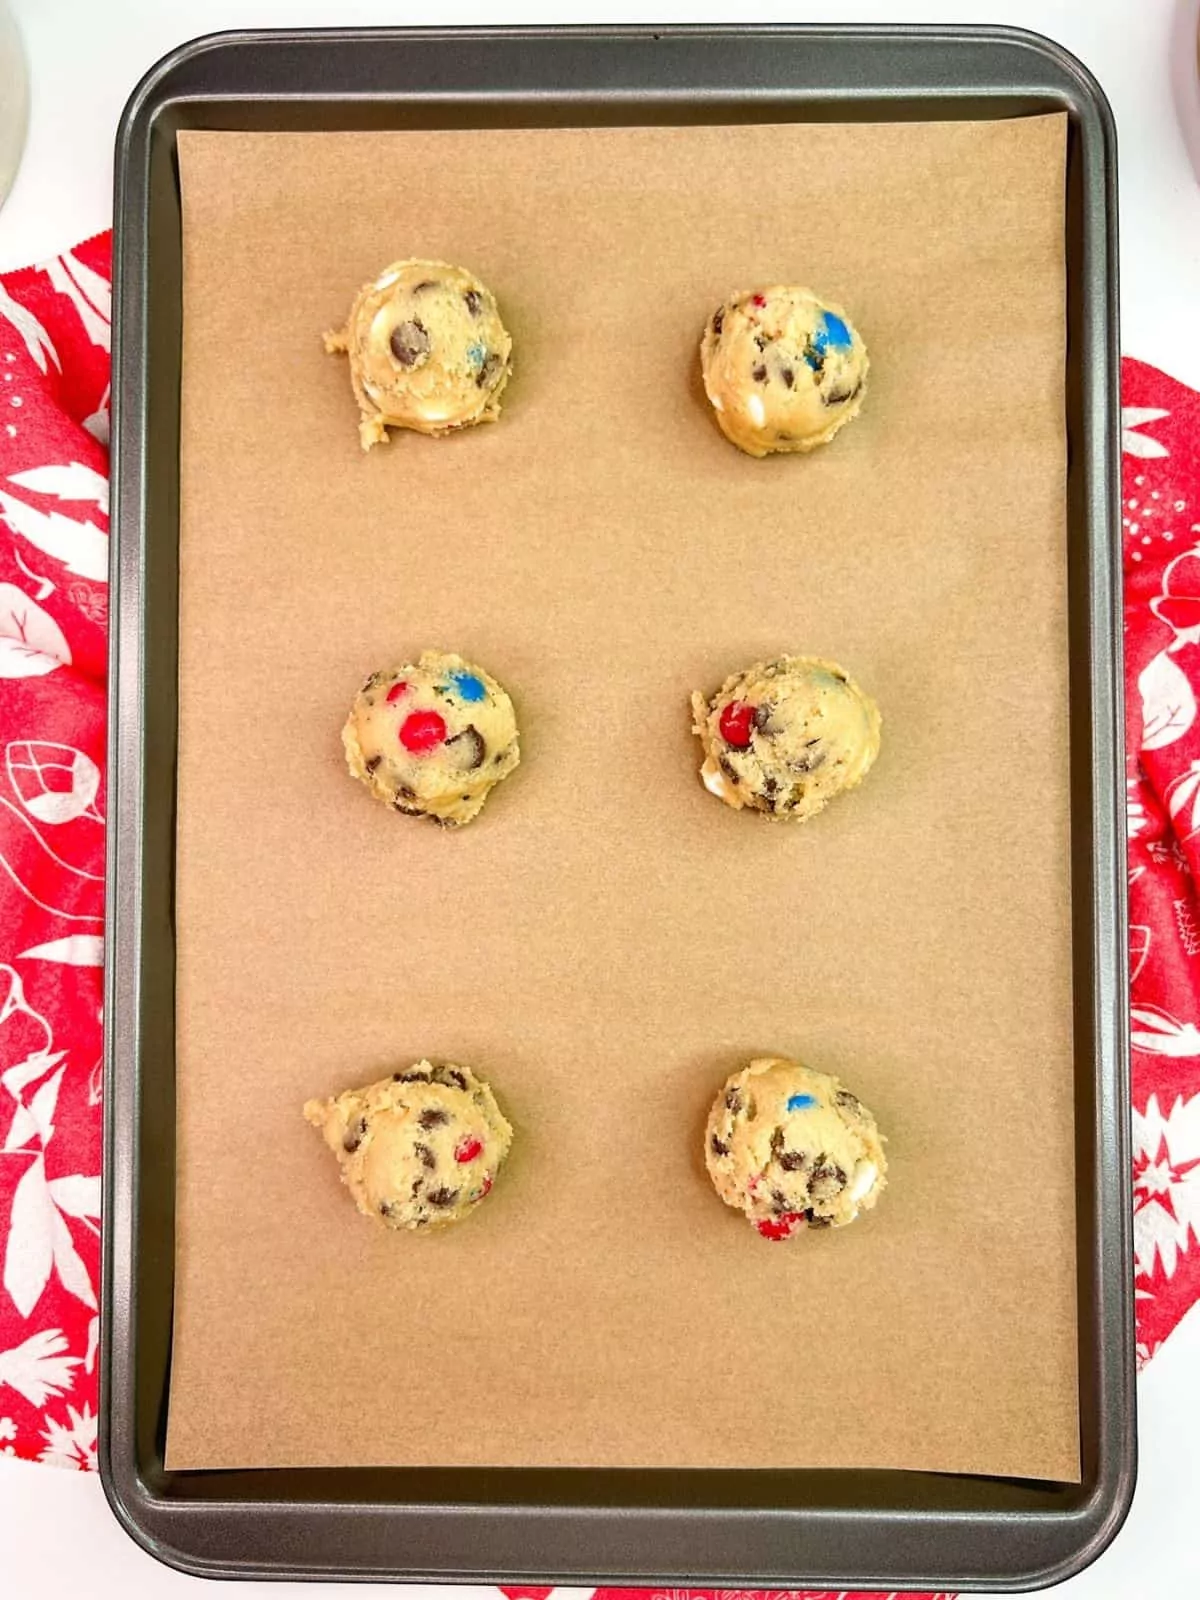 mounds of cookie dough on baking tray.